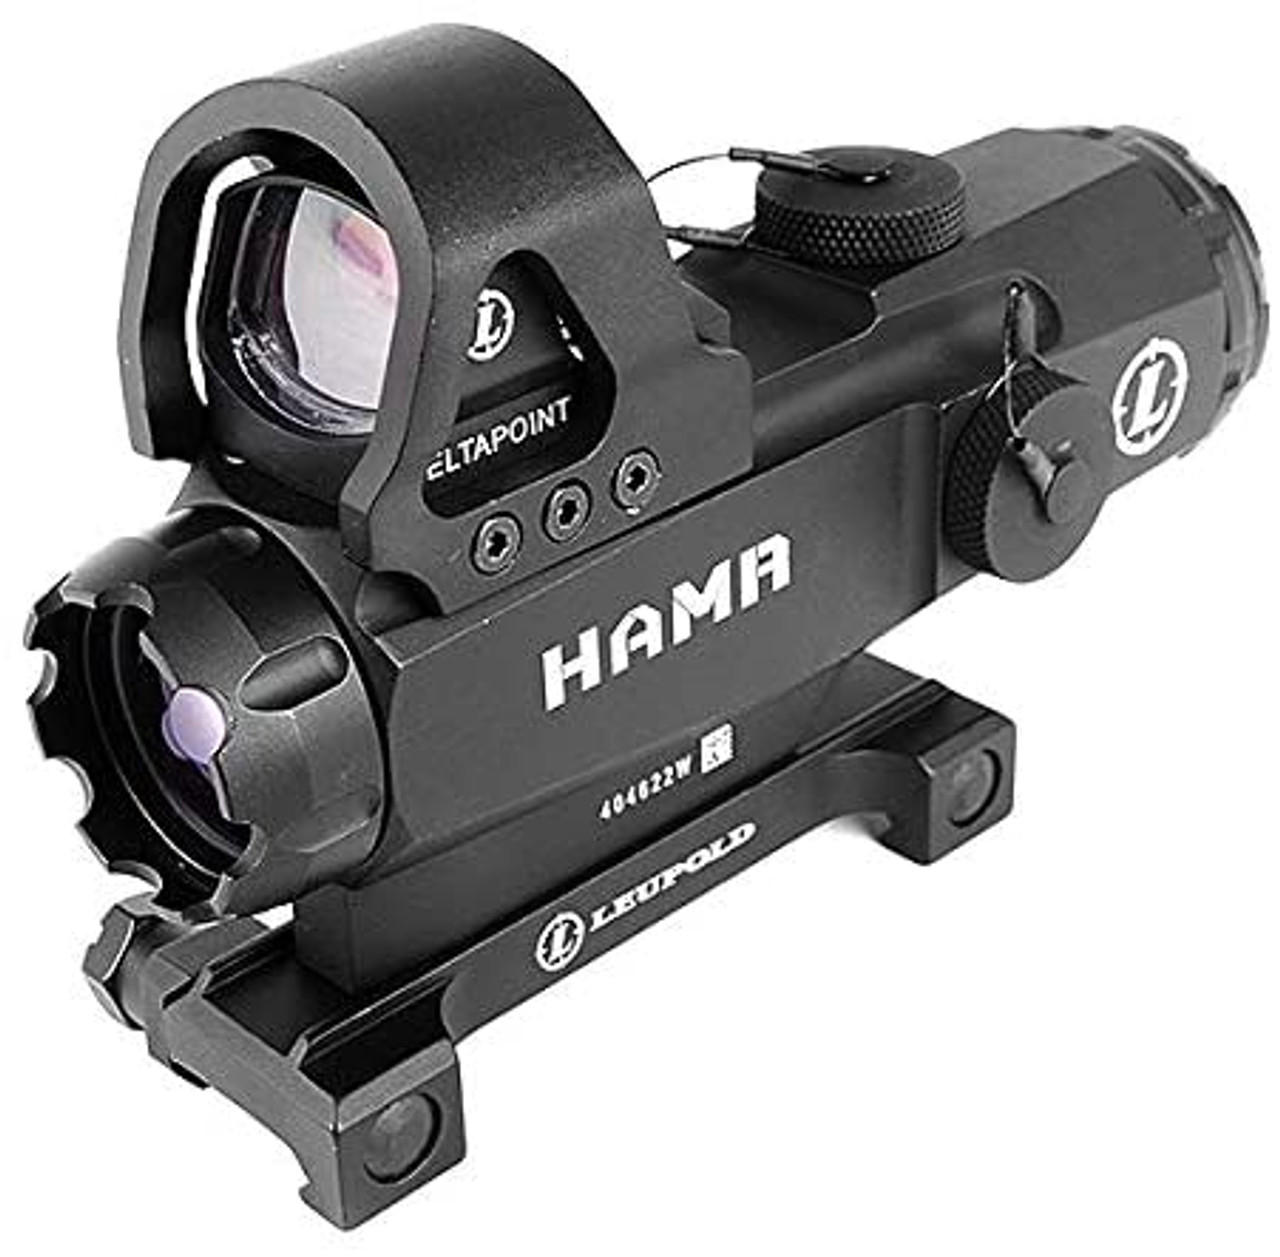 LEUPOLD HAMR type scope with DeltaPoint type dot sight